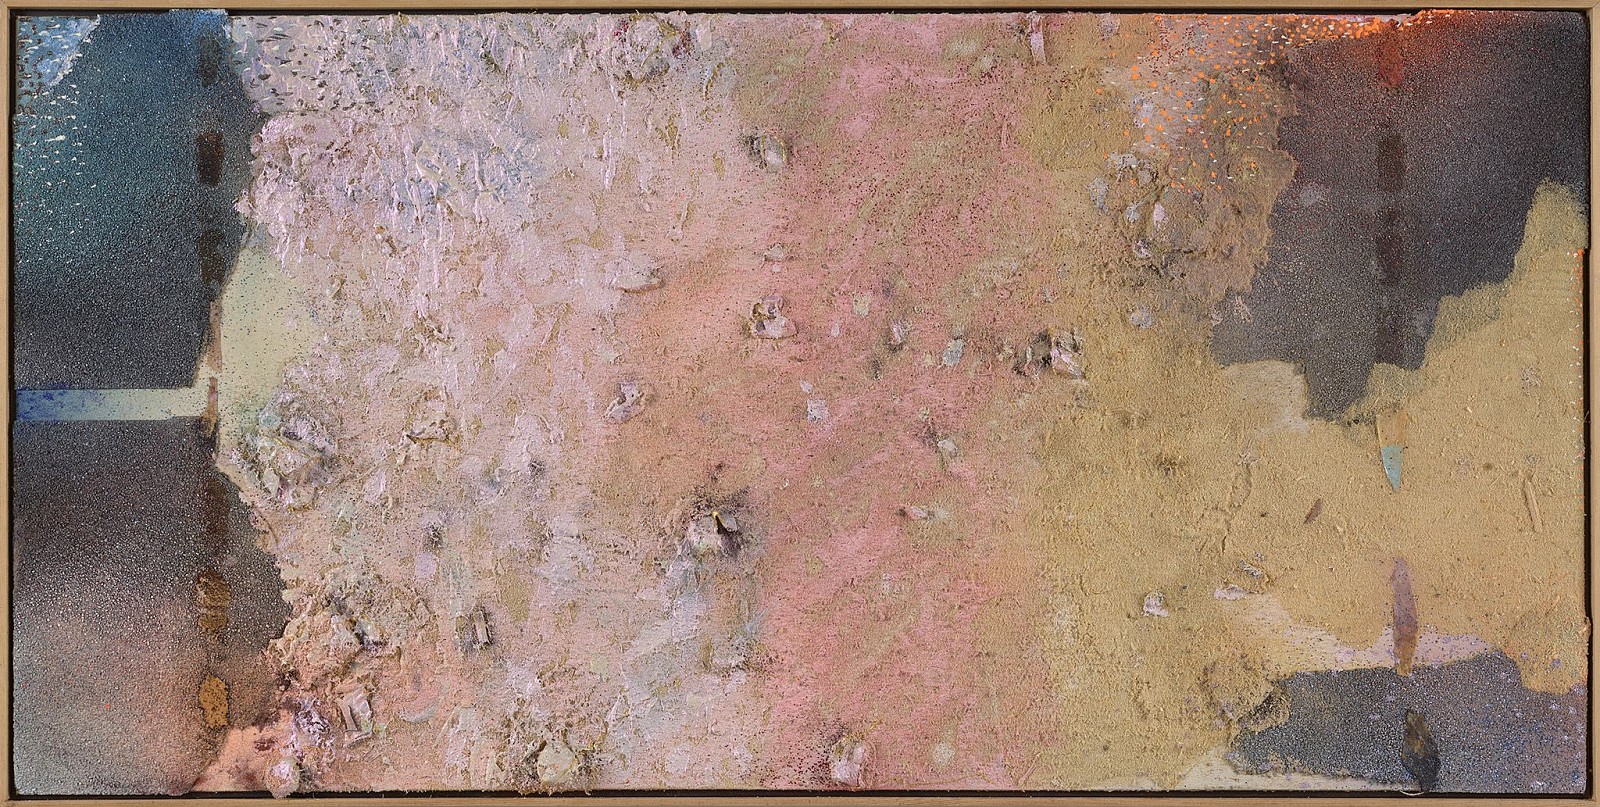 Stanley Boxer, Enchantingcalm, 1995
Oil and mixed media on canvas, 24 1/2 x 49 1/2 in. (62.2 x 125.7 cm)
BOX-00040